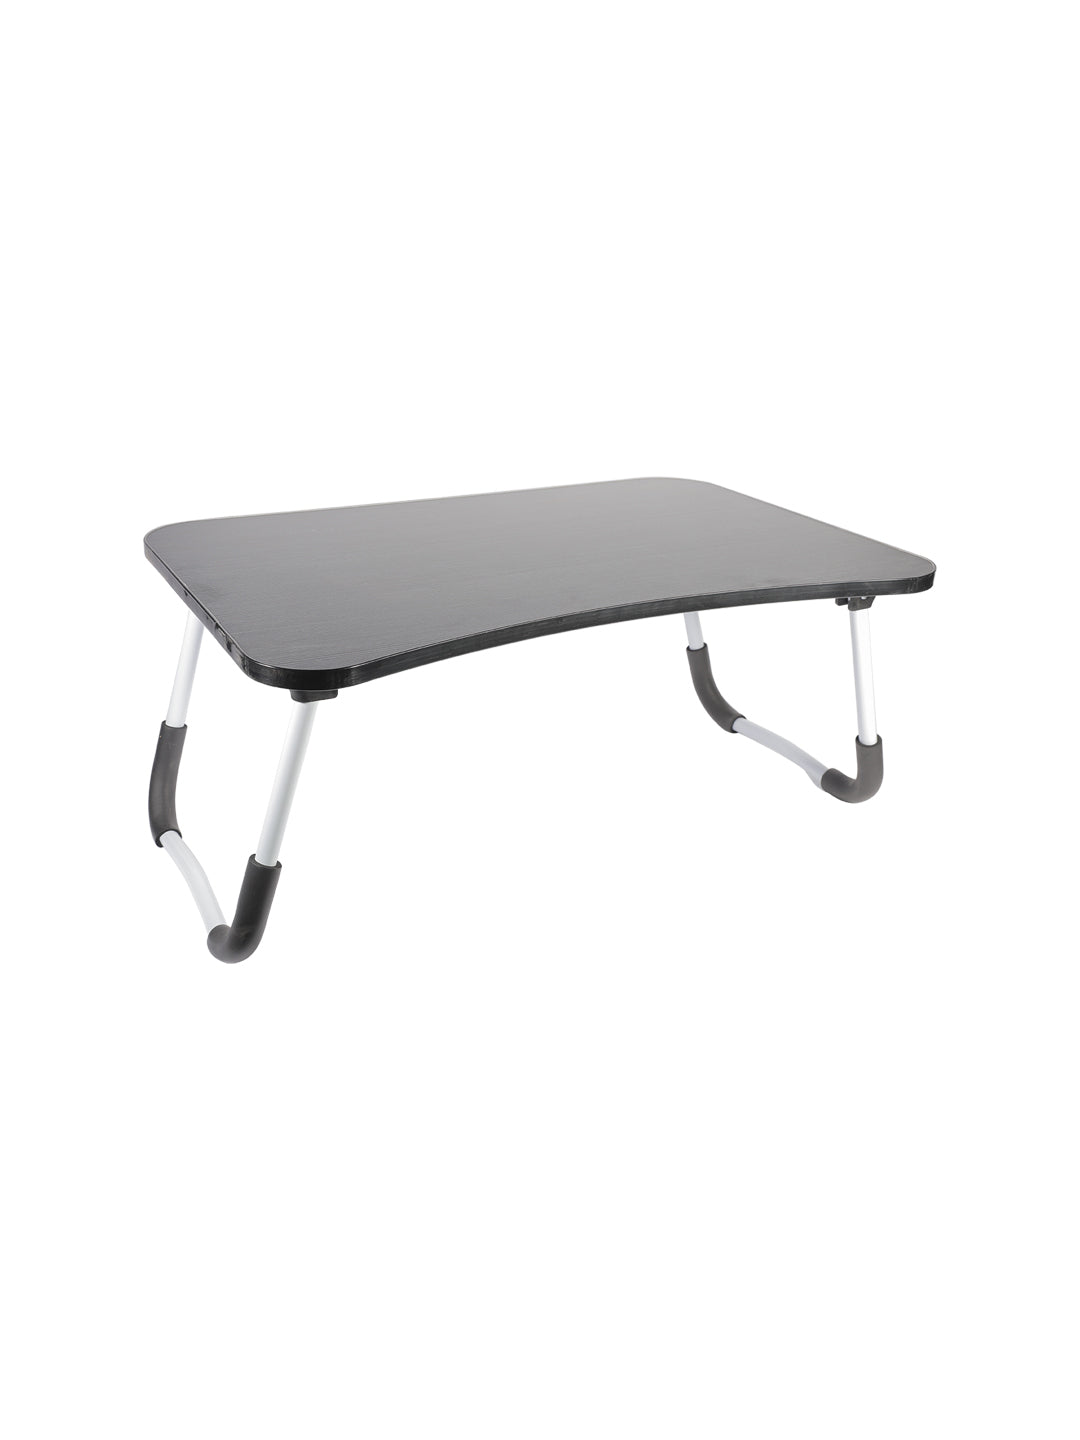 VON CASA Foldable And Portable Wooden Laptop Table - Grey